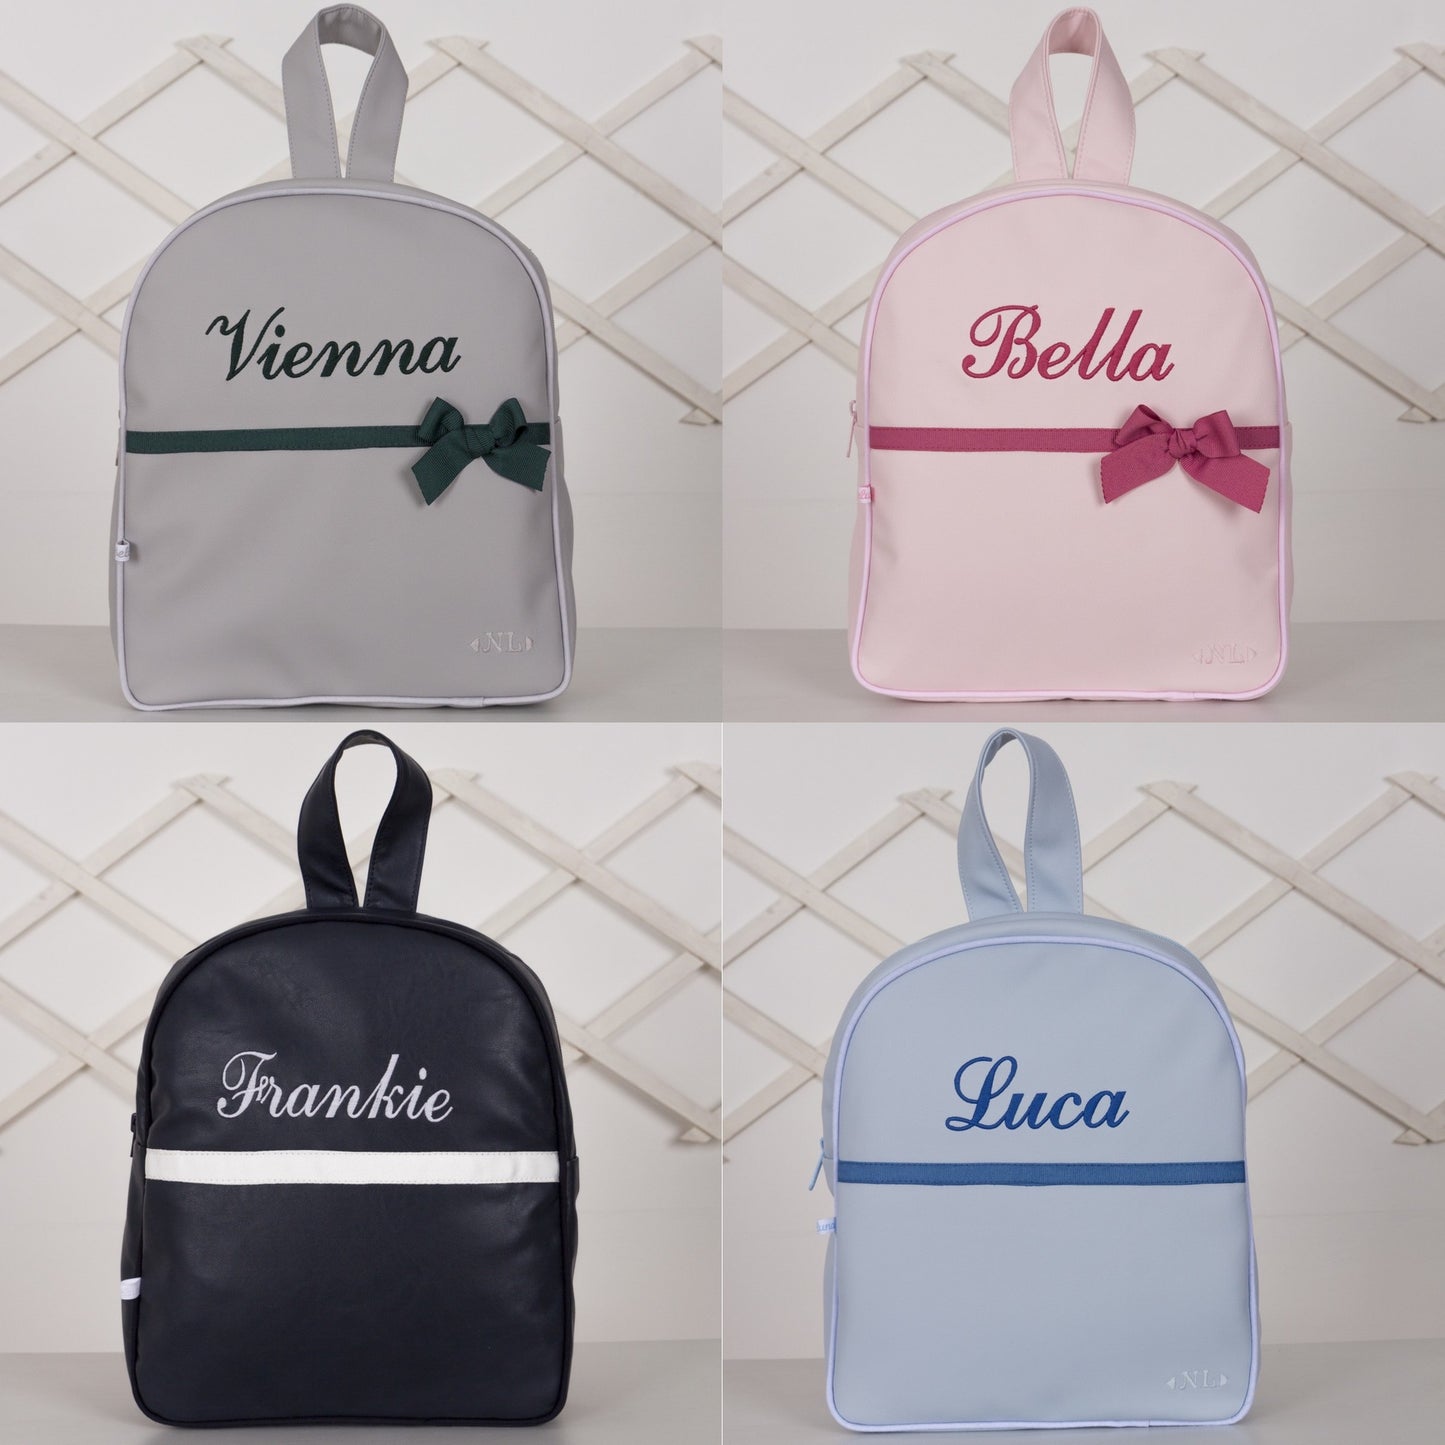 Spanish Personalised Backpack 2021 Edition